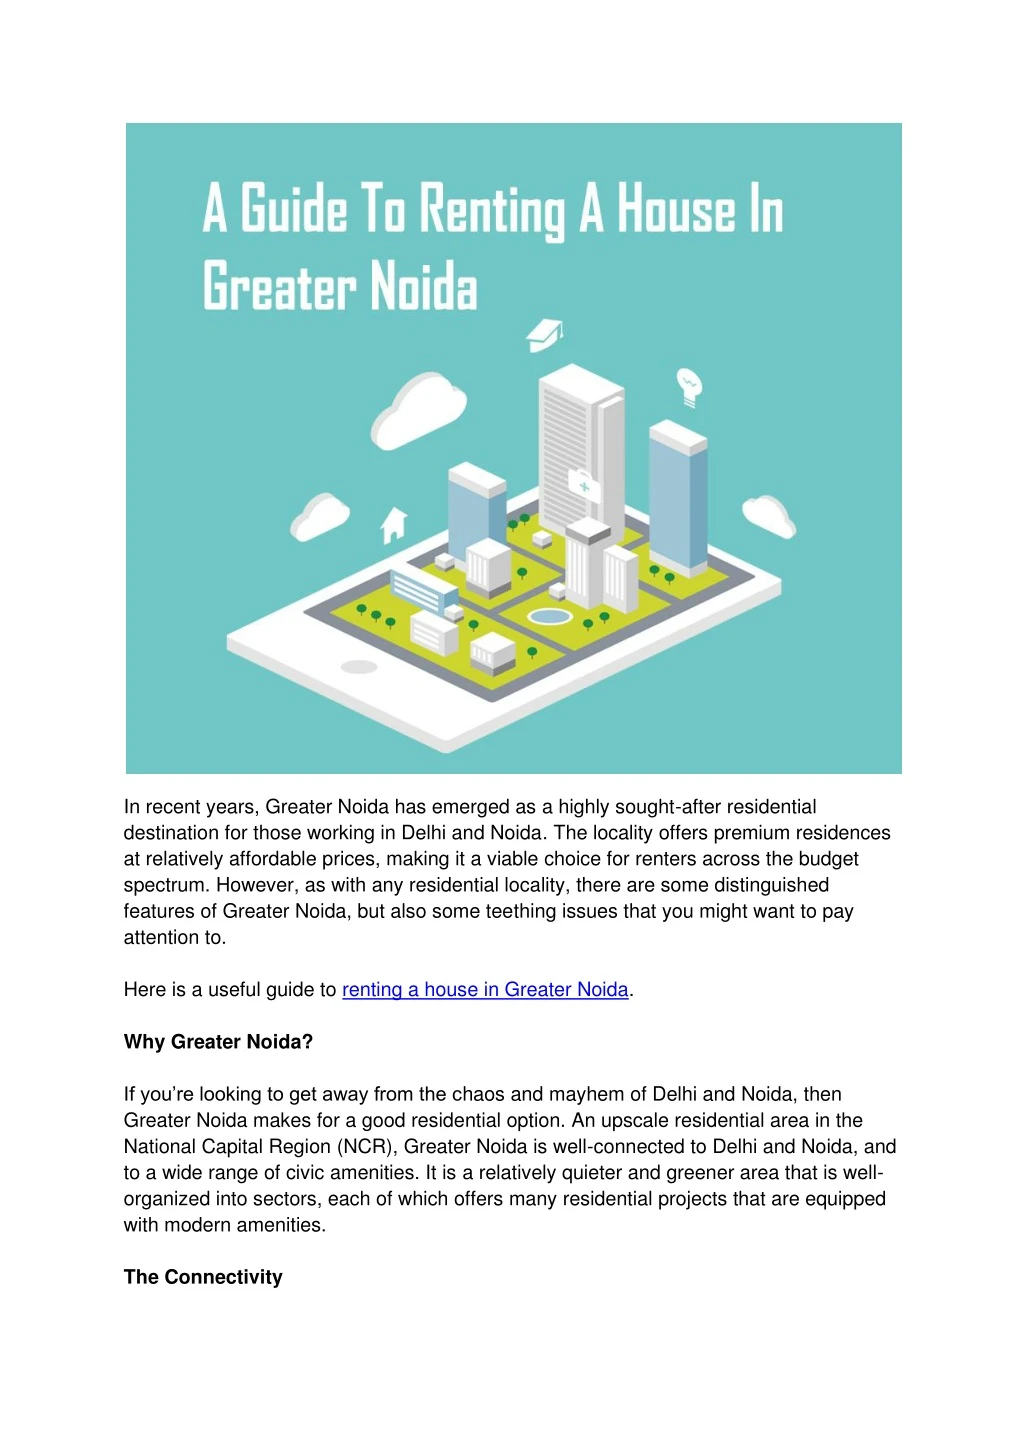 in recent years greater noida has emerged